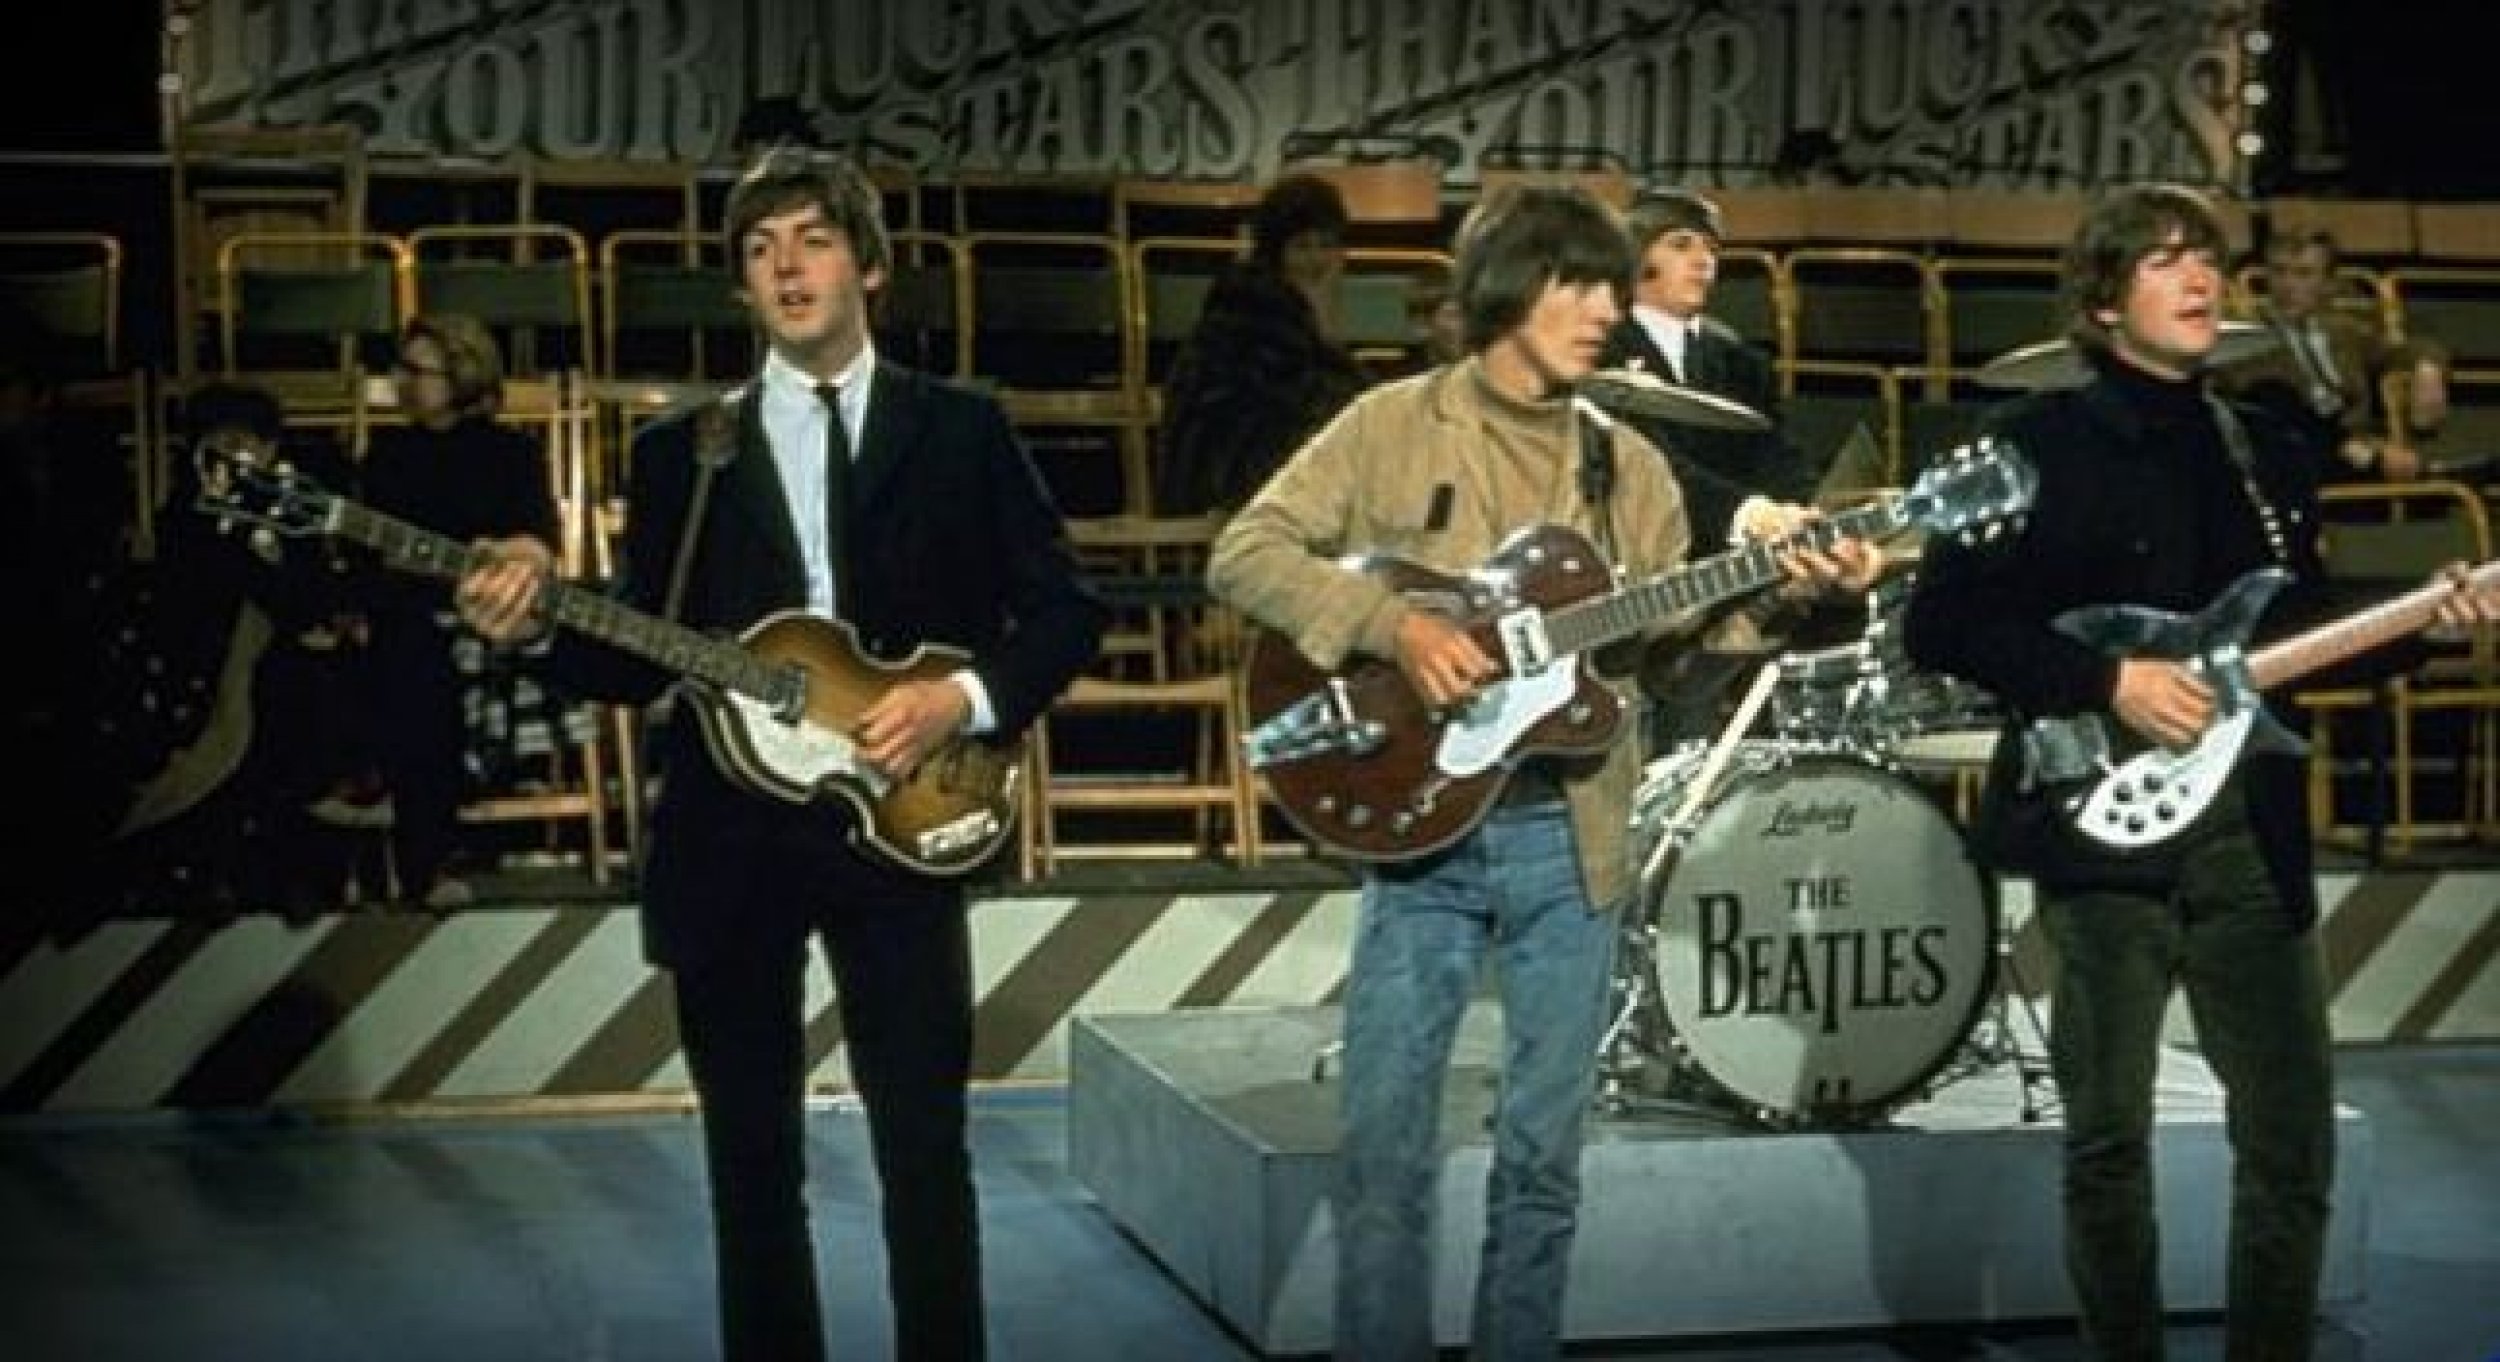 Rare images of Beatles